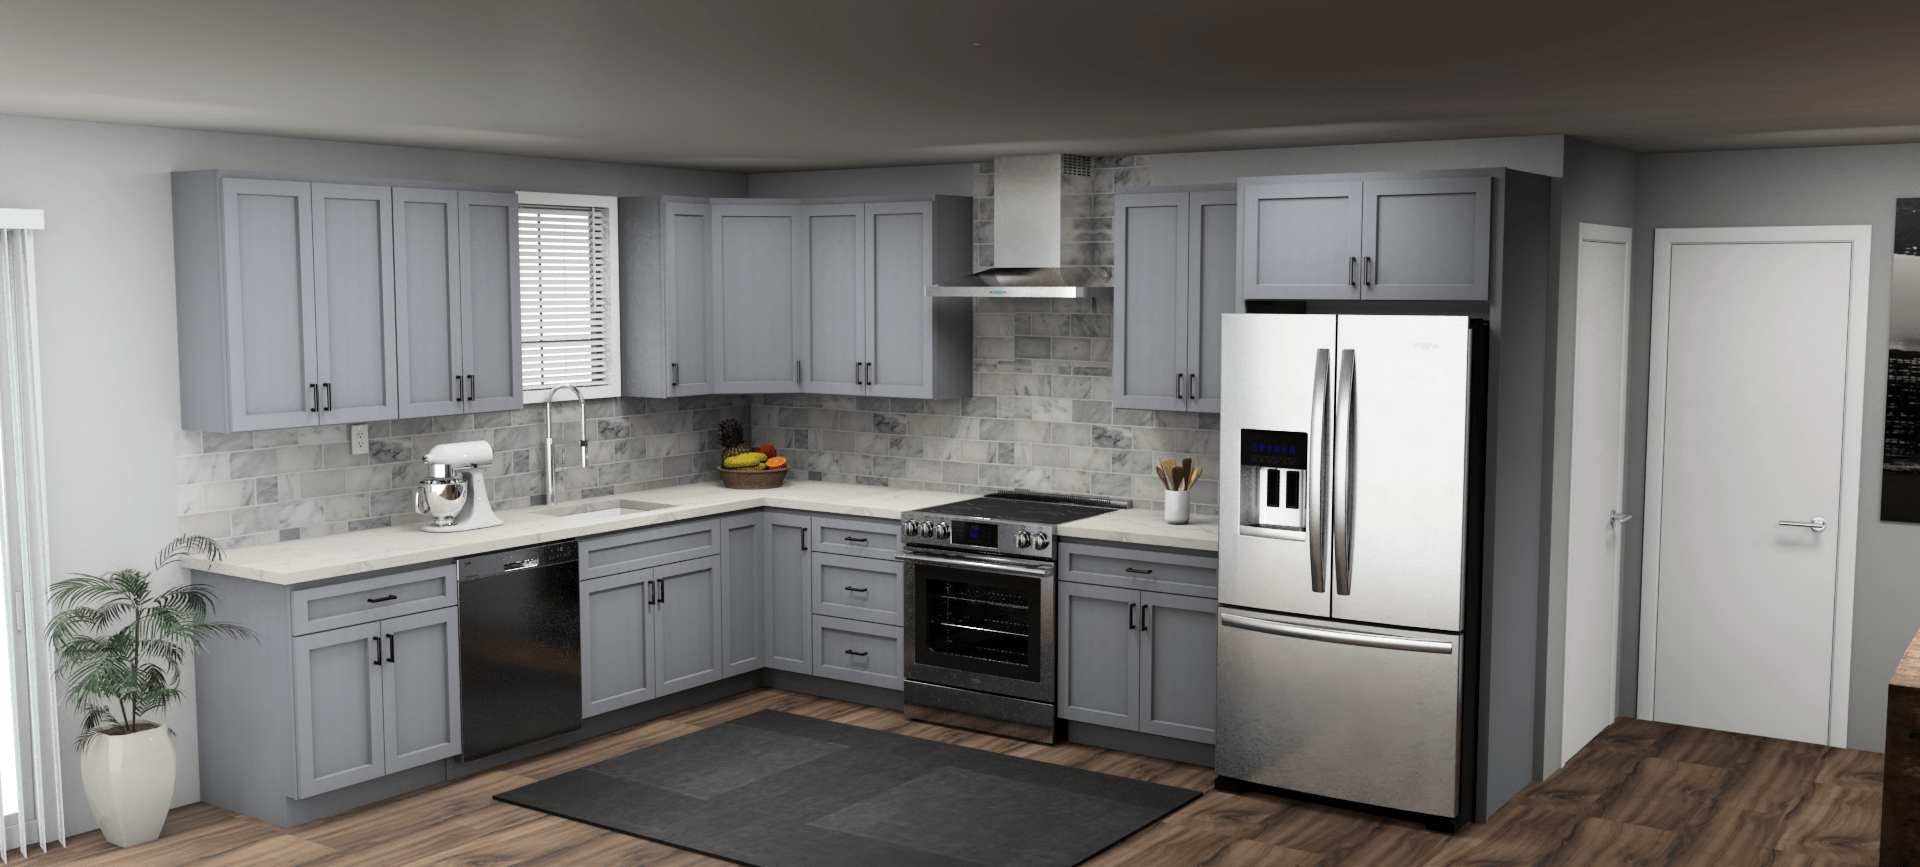 Pioneer The Grey Shaker 10 x 13 L Shaped Kitchen Main Layout Photo